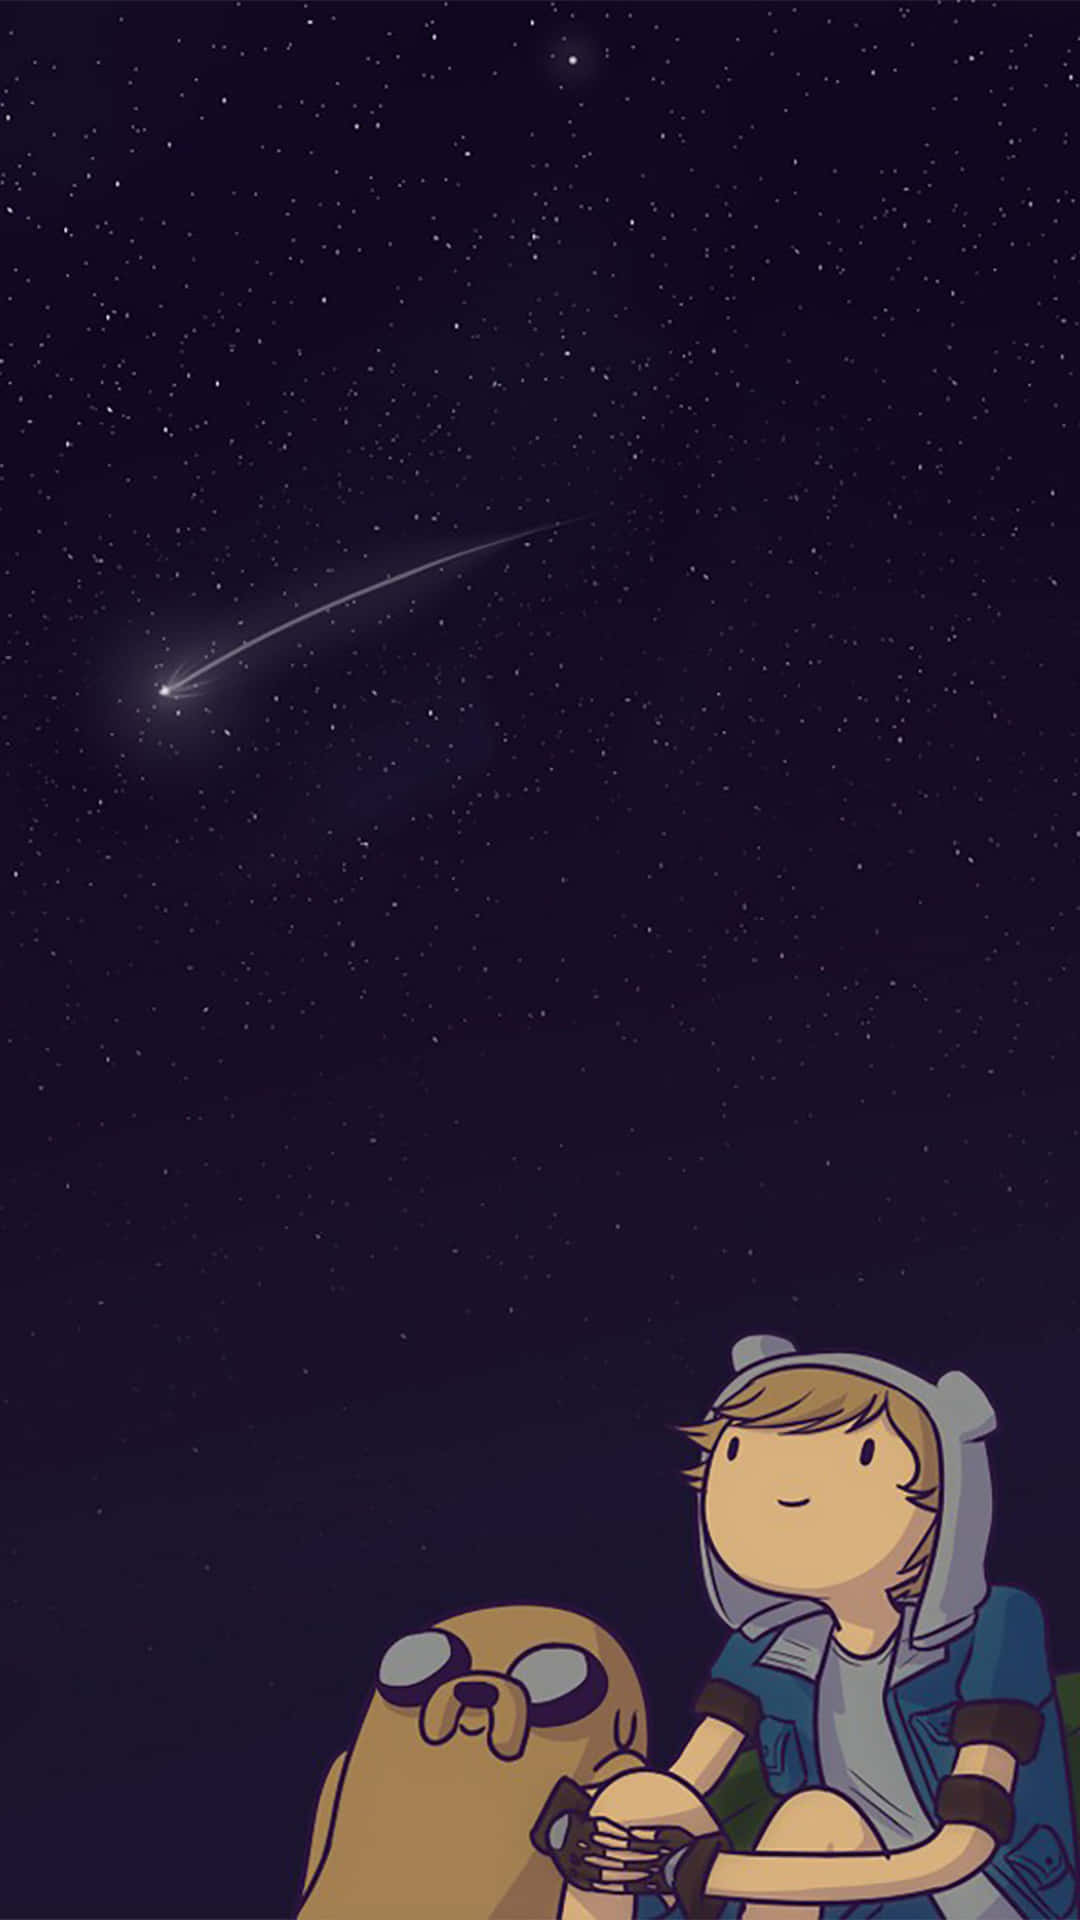 adventure time iphone wallpapers